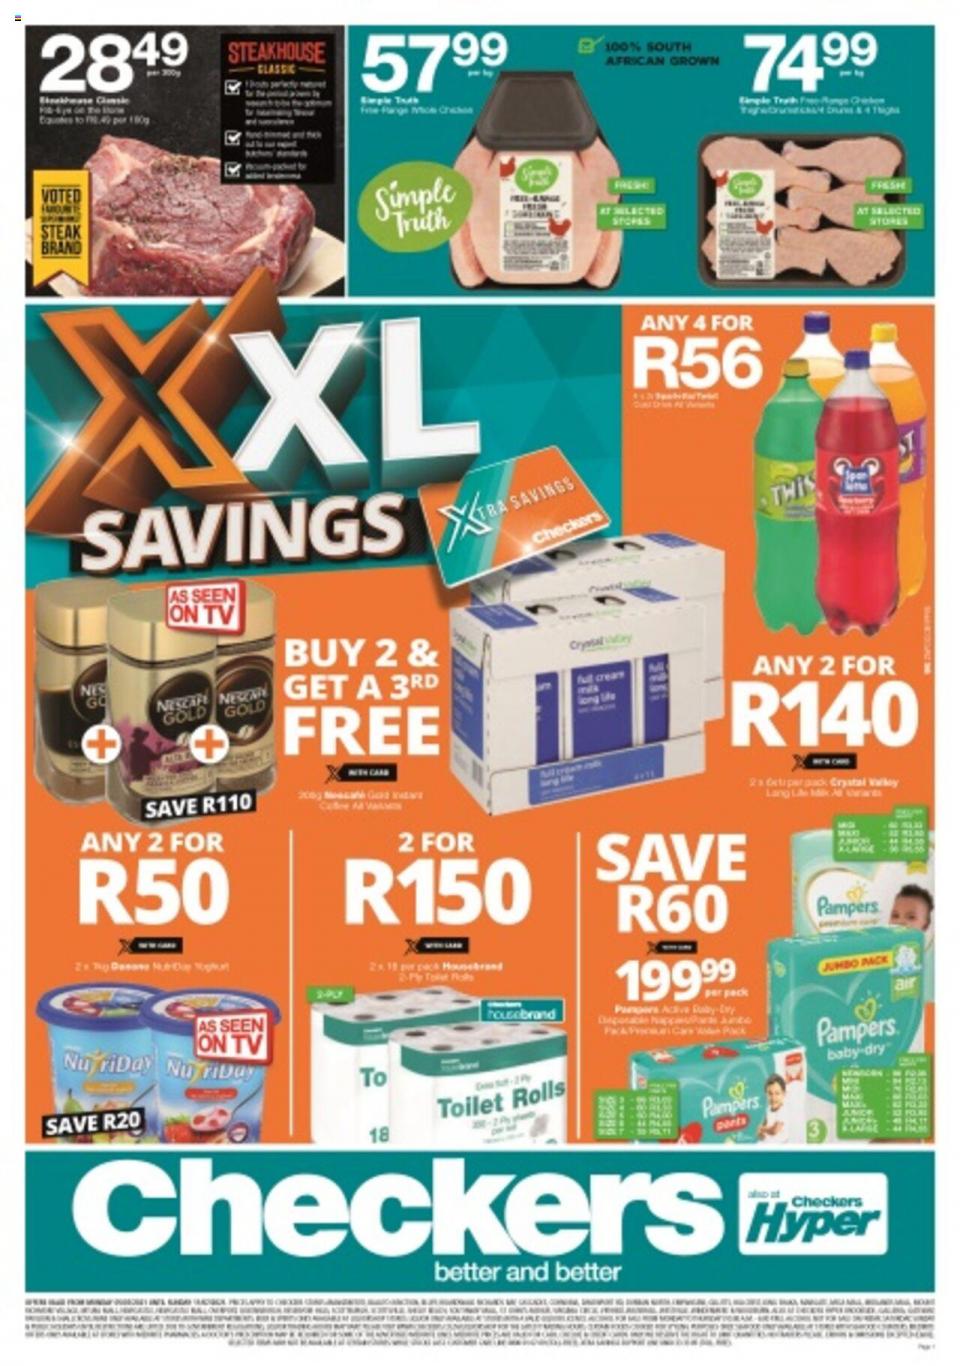 Checkers Specials XXL Savings 5 – 11 July 2021